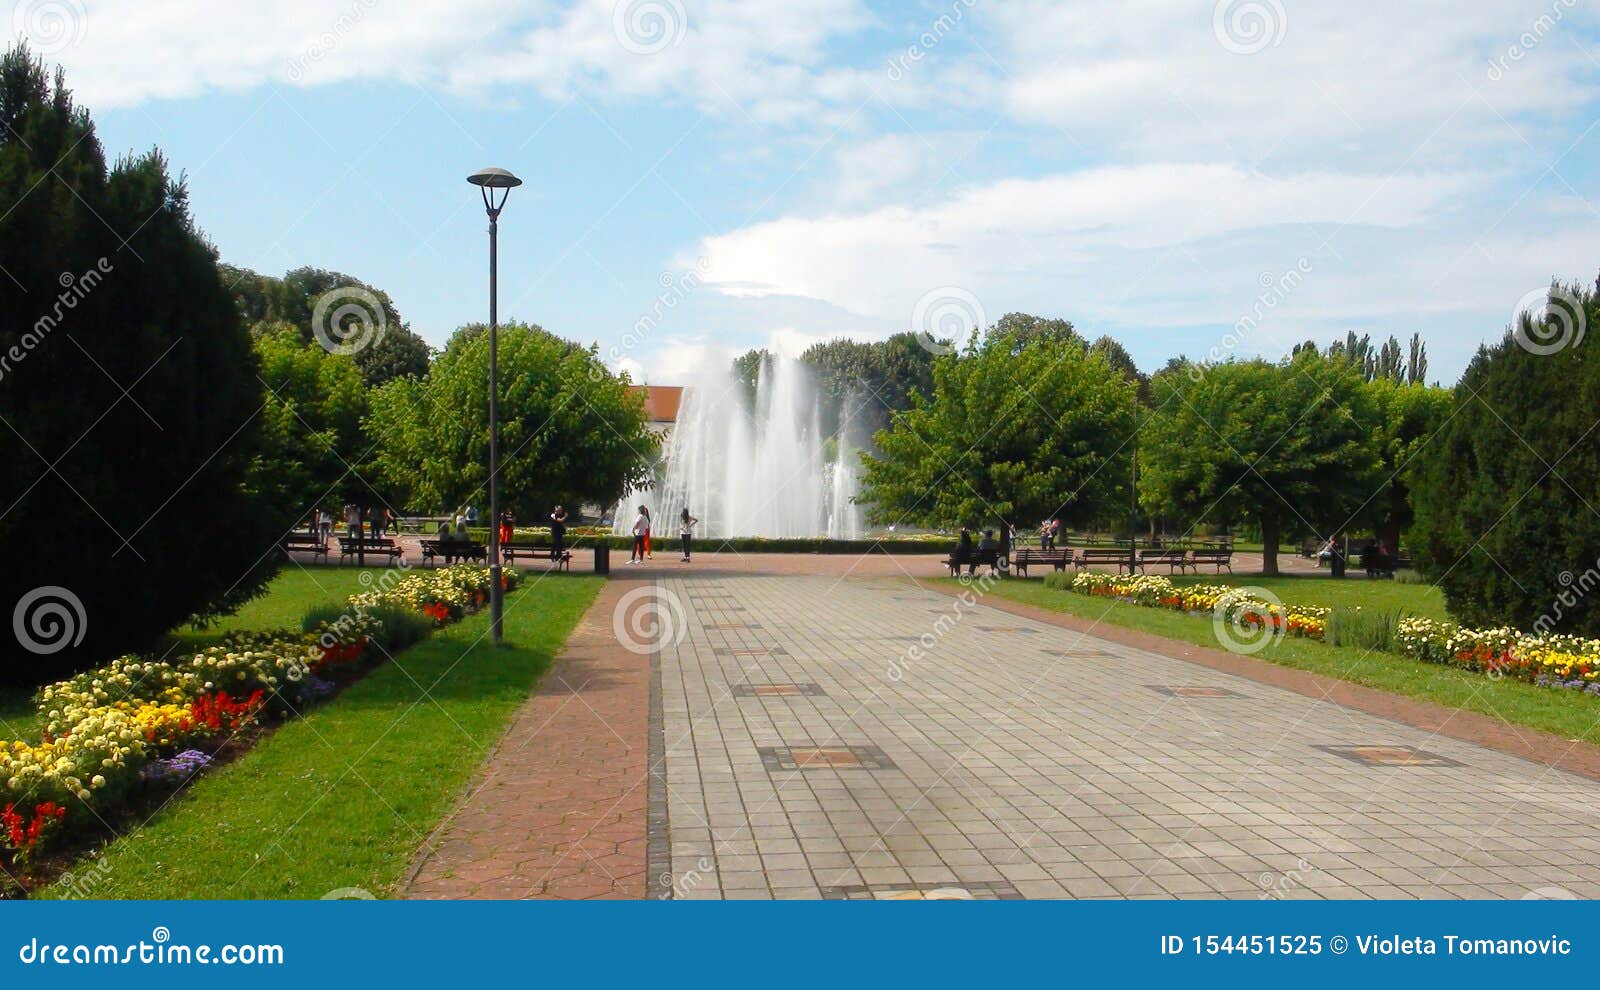 Beautiful Formal Garden Park With Architecture And Fountain In